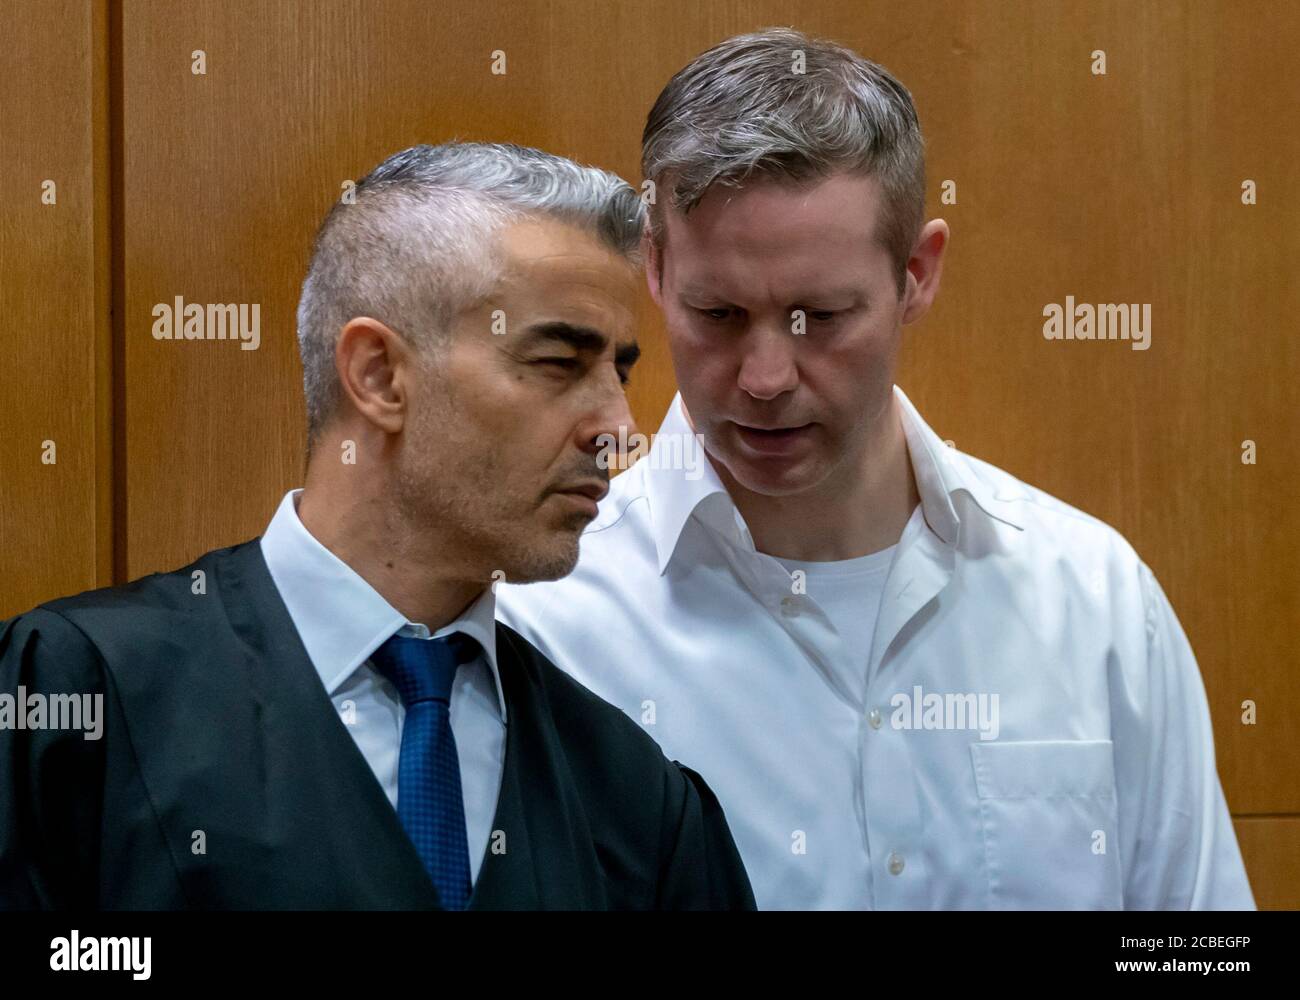 13 August 2020, Hessen, Frankfurt/Main: Stephan Ernst, who is accused of the murder of the politician W. Lübcke, talks to his lawyer Mustafa Kaplan (l) when he arrives in the courtroom to continue his trial. Ernst is said to have shot the North Hessian District President Lübcke on his terrace a year ago, because the CDU politician had been campaigning for refugees. Photo: Ronald Wittek/epa Pool/dpa Stock Photo